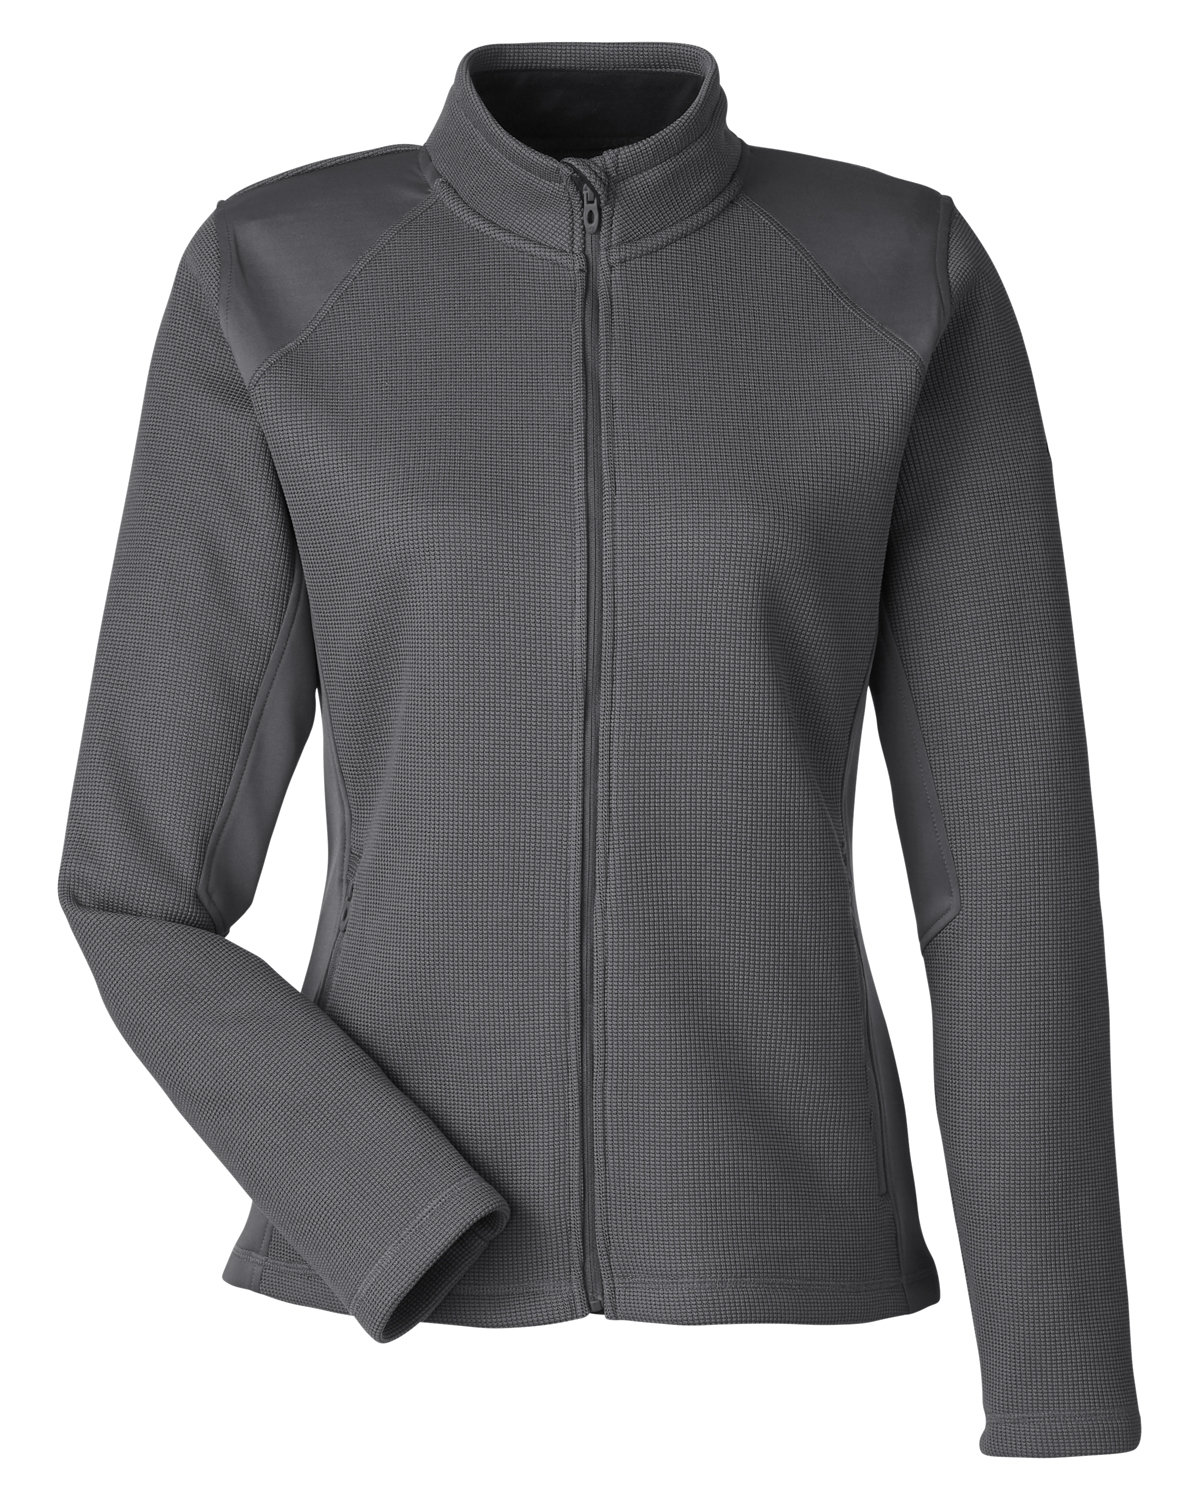 Spyder S17937 - Ladies' Constant Canyon Sweater